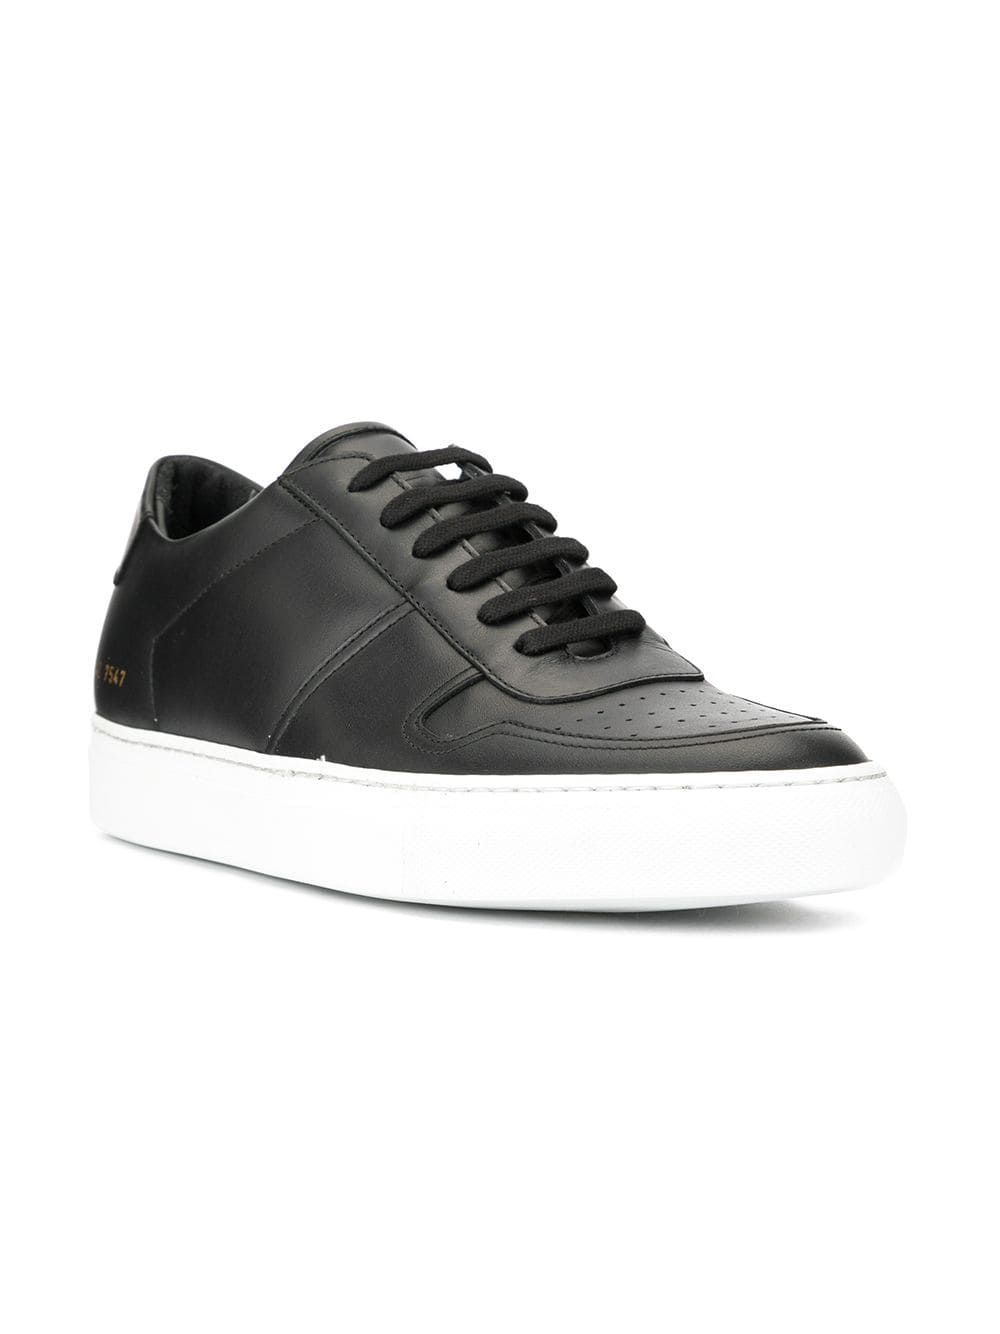 completely black trainers